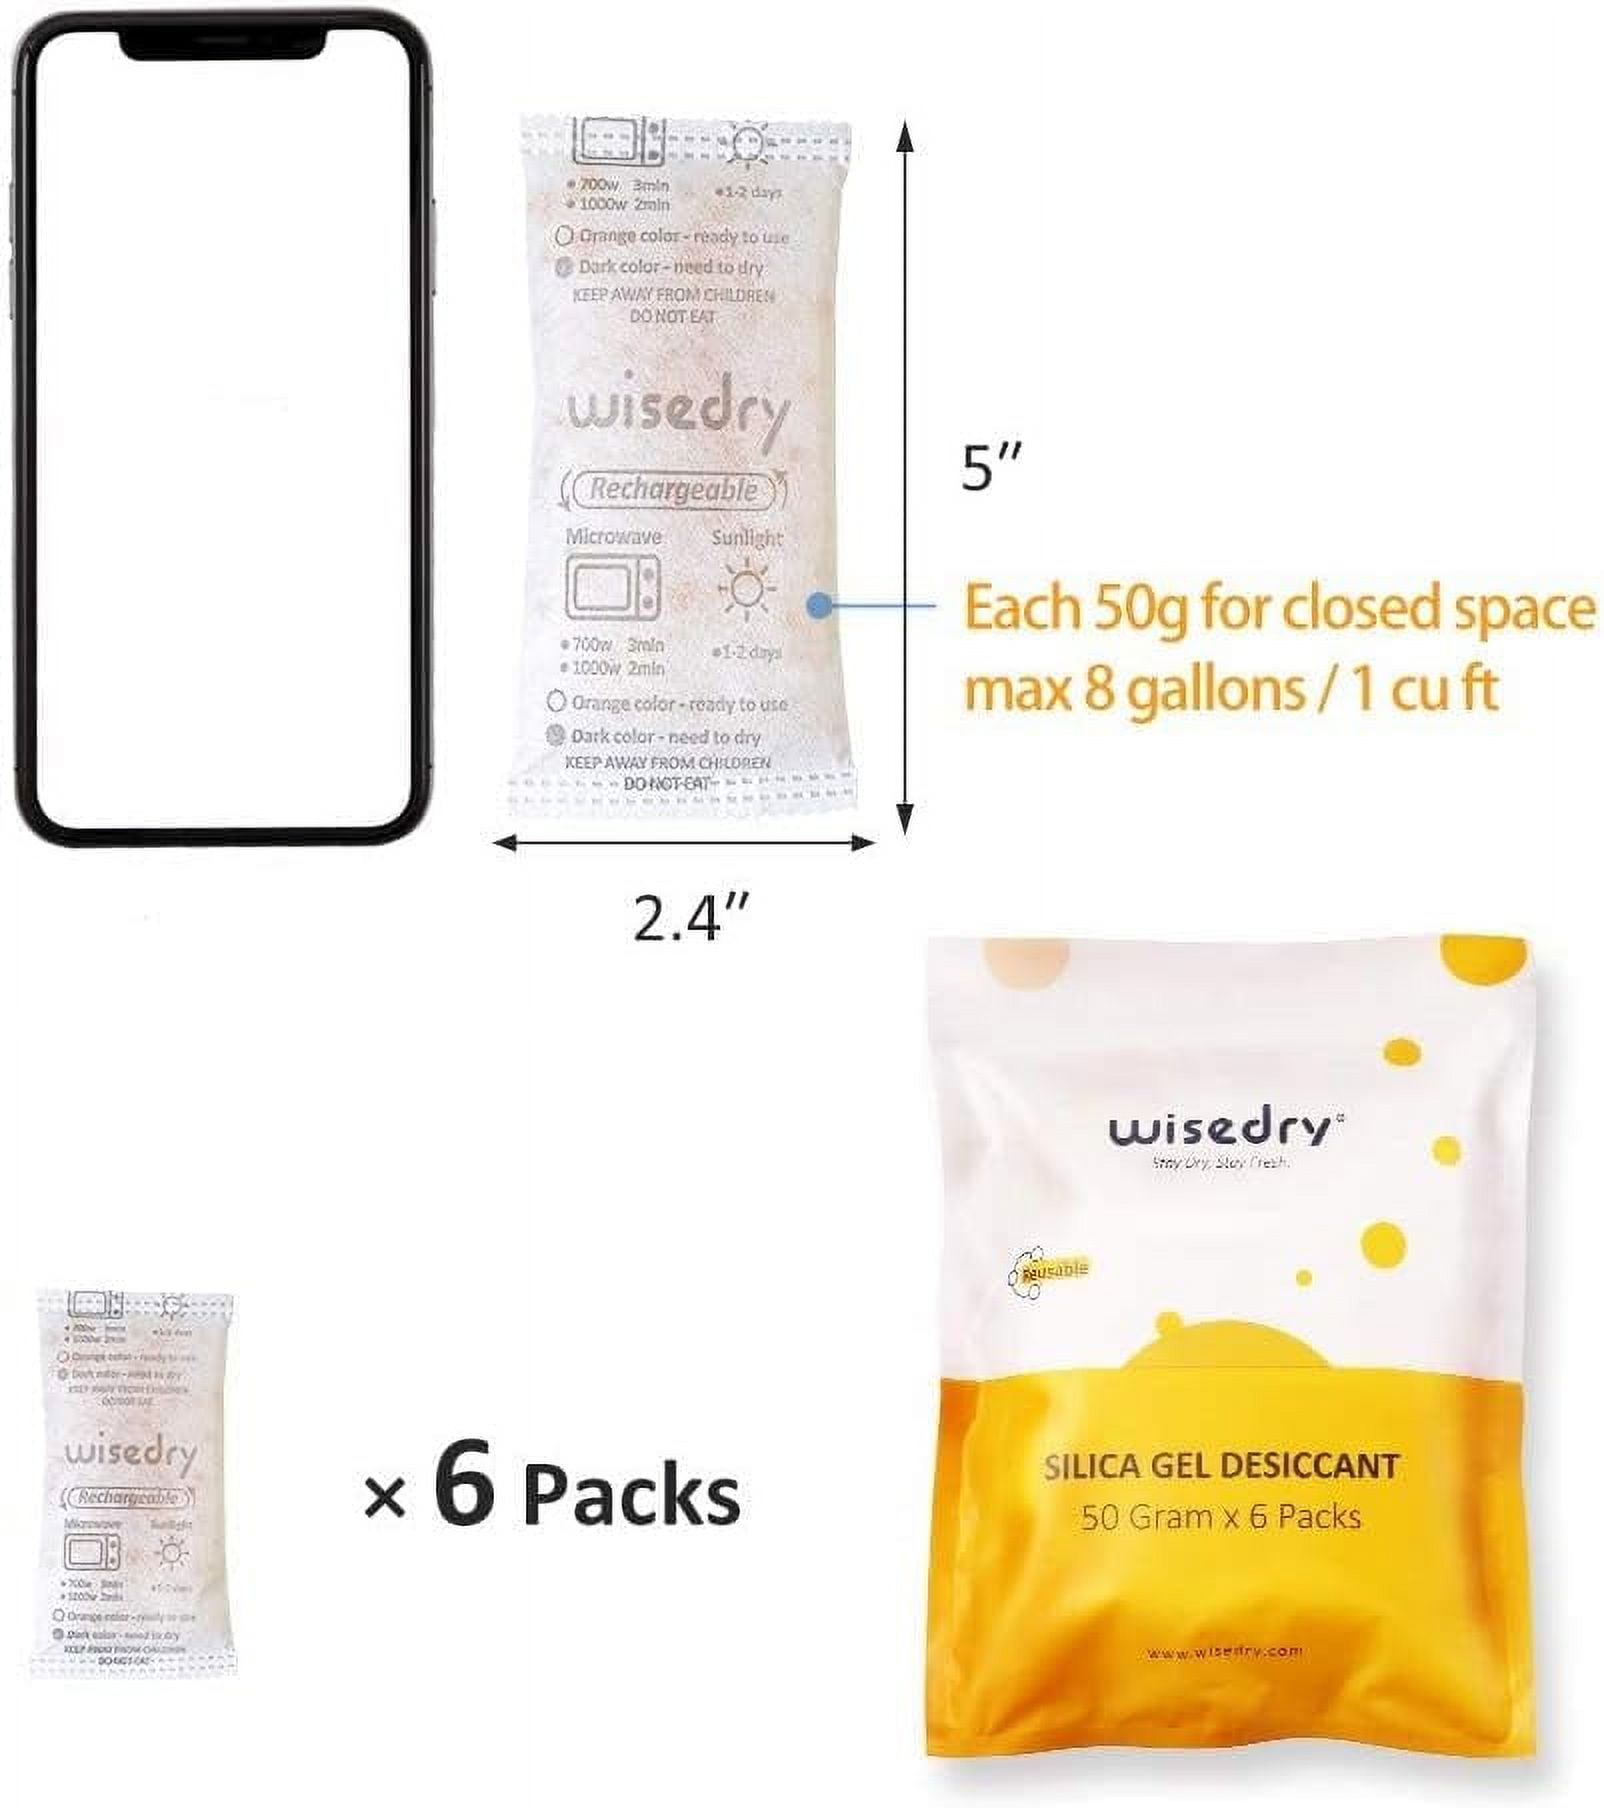  wisedry 20 Gram [12 Packs] Rechargeable Silica Gel Packets  Microwave Fast Reactivate in 2MINS Moisture Absorber Desiccant Packs with  Orange Indicating Beads Food Grade: Home & Kitchen